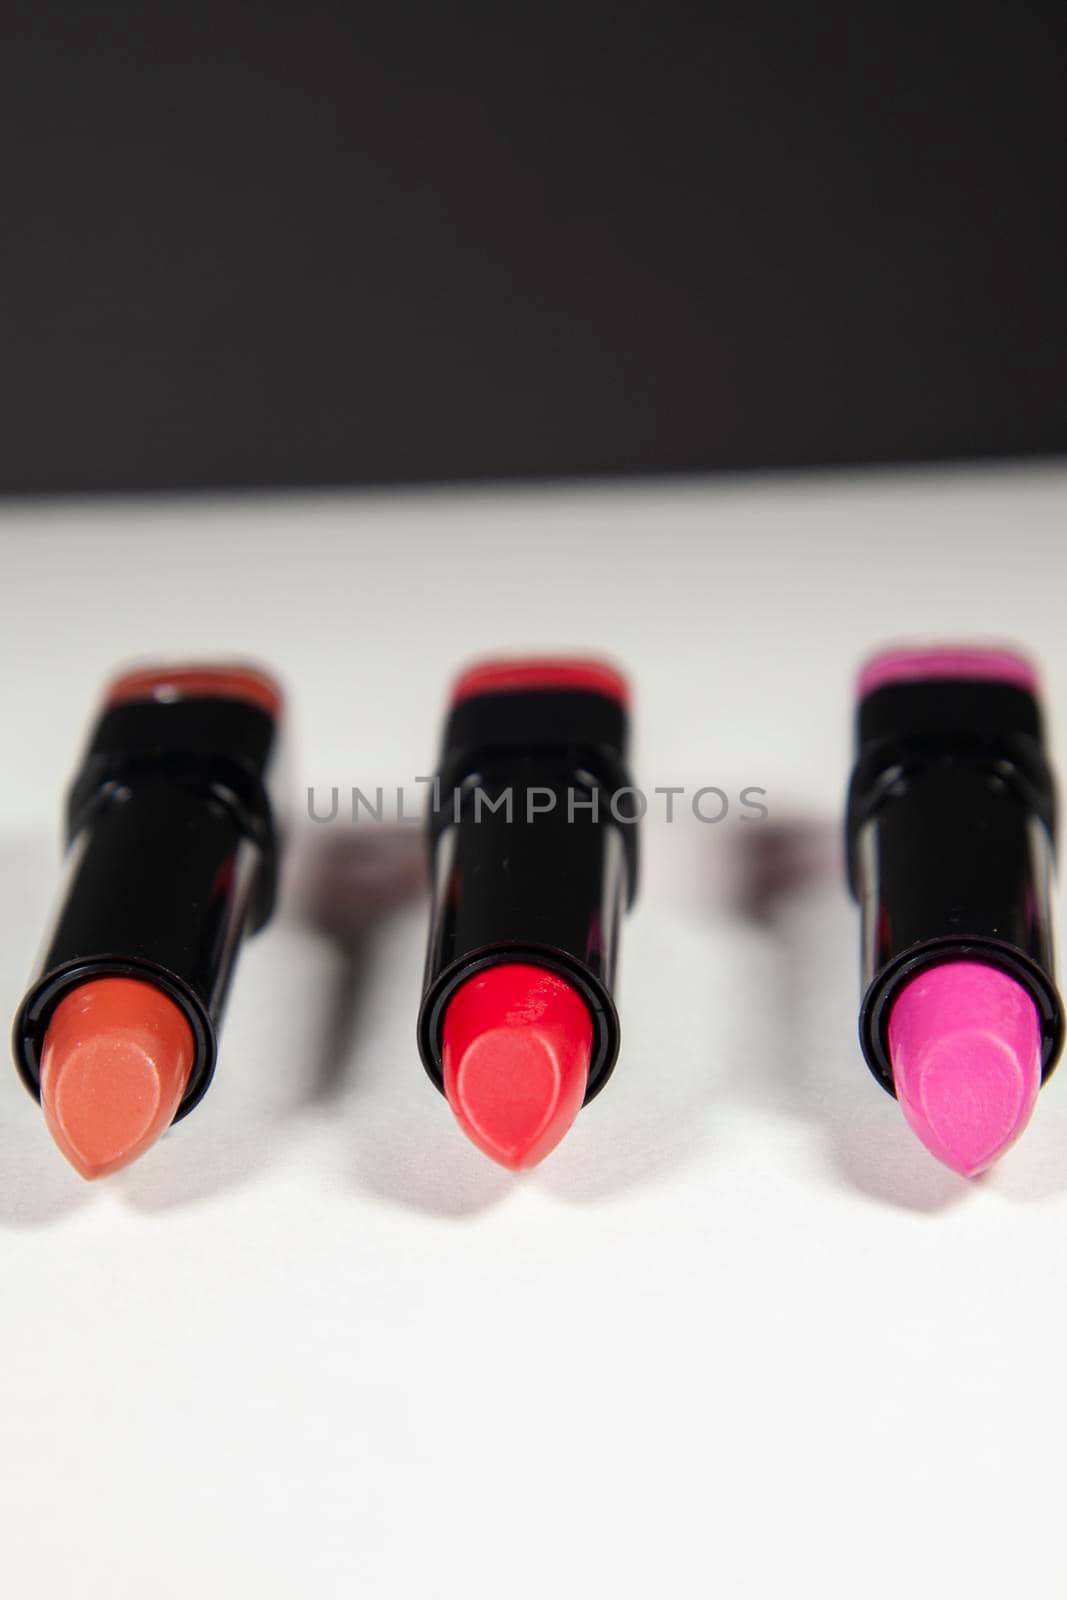 Red and Pink Lipsticks by tornado98